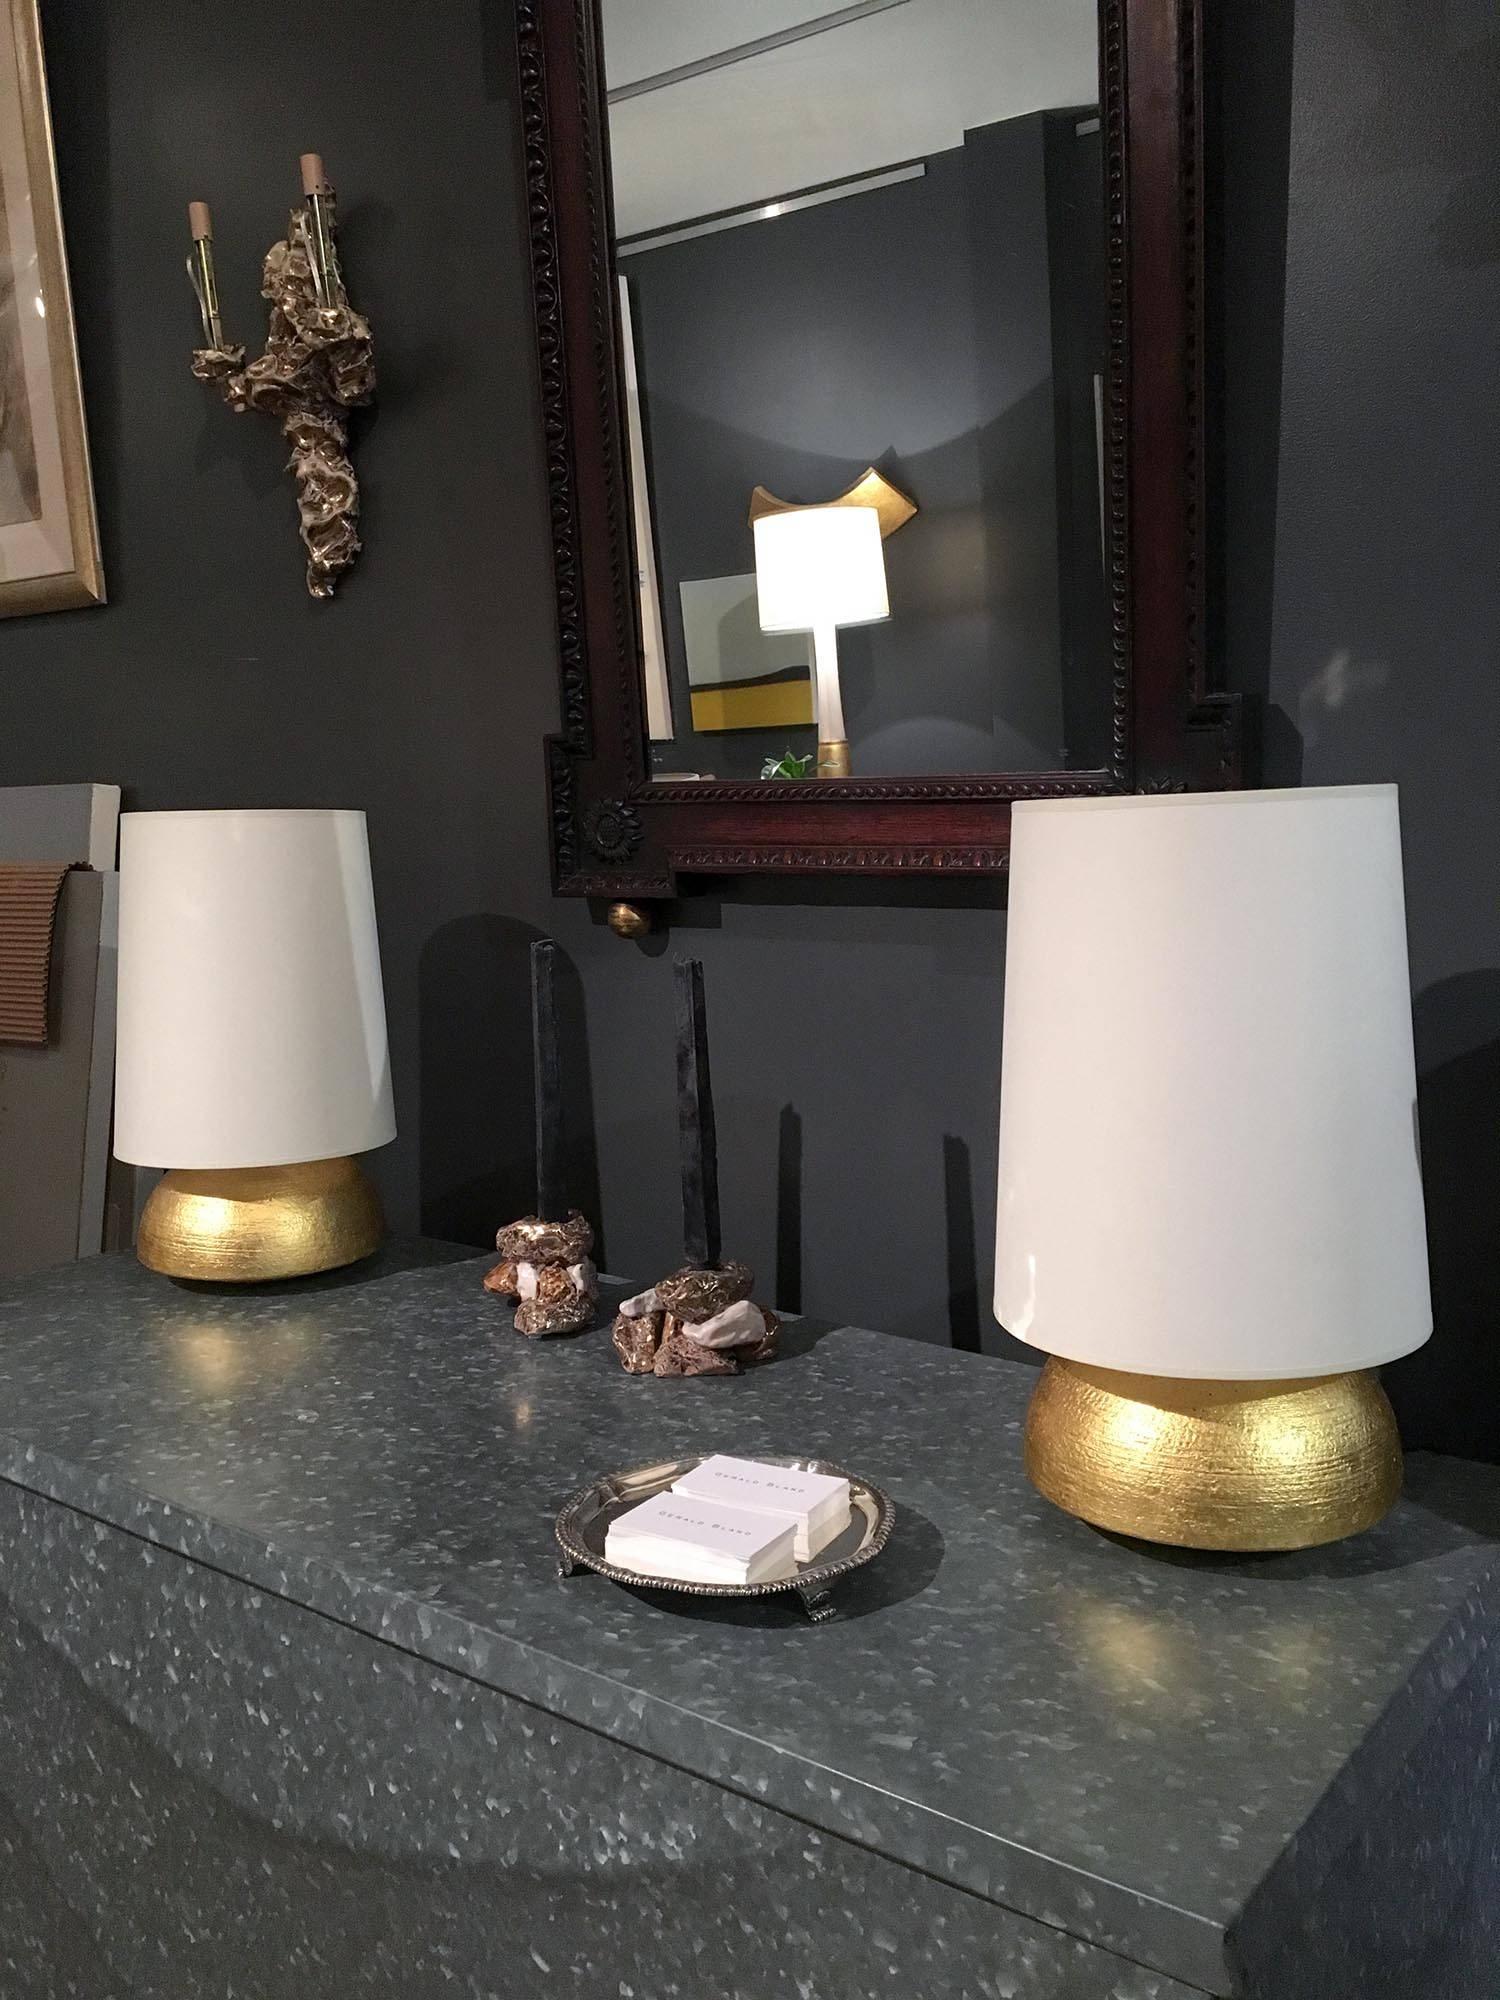 Pair of hand-coiled and gilded ceramic lamps with lampshades by Andrea Koeppel. Available as custom order.

Materials and techniques notes: Models of understated luxury, Koeppels gilt lamps are made in the hand-coiled tradition and fired with